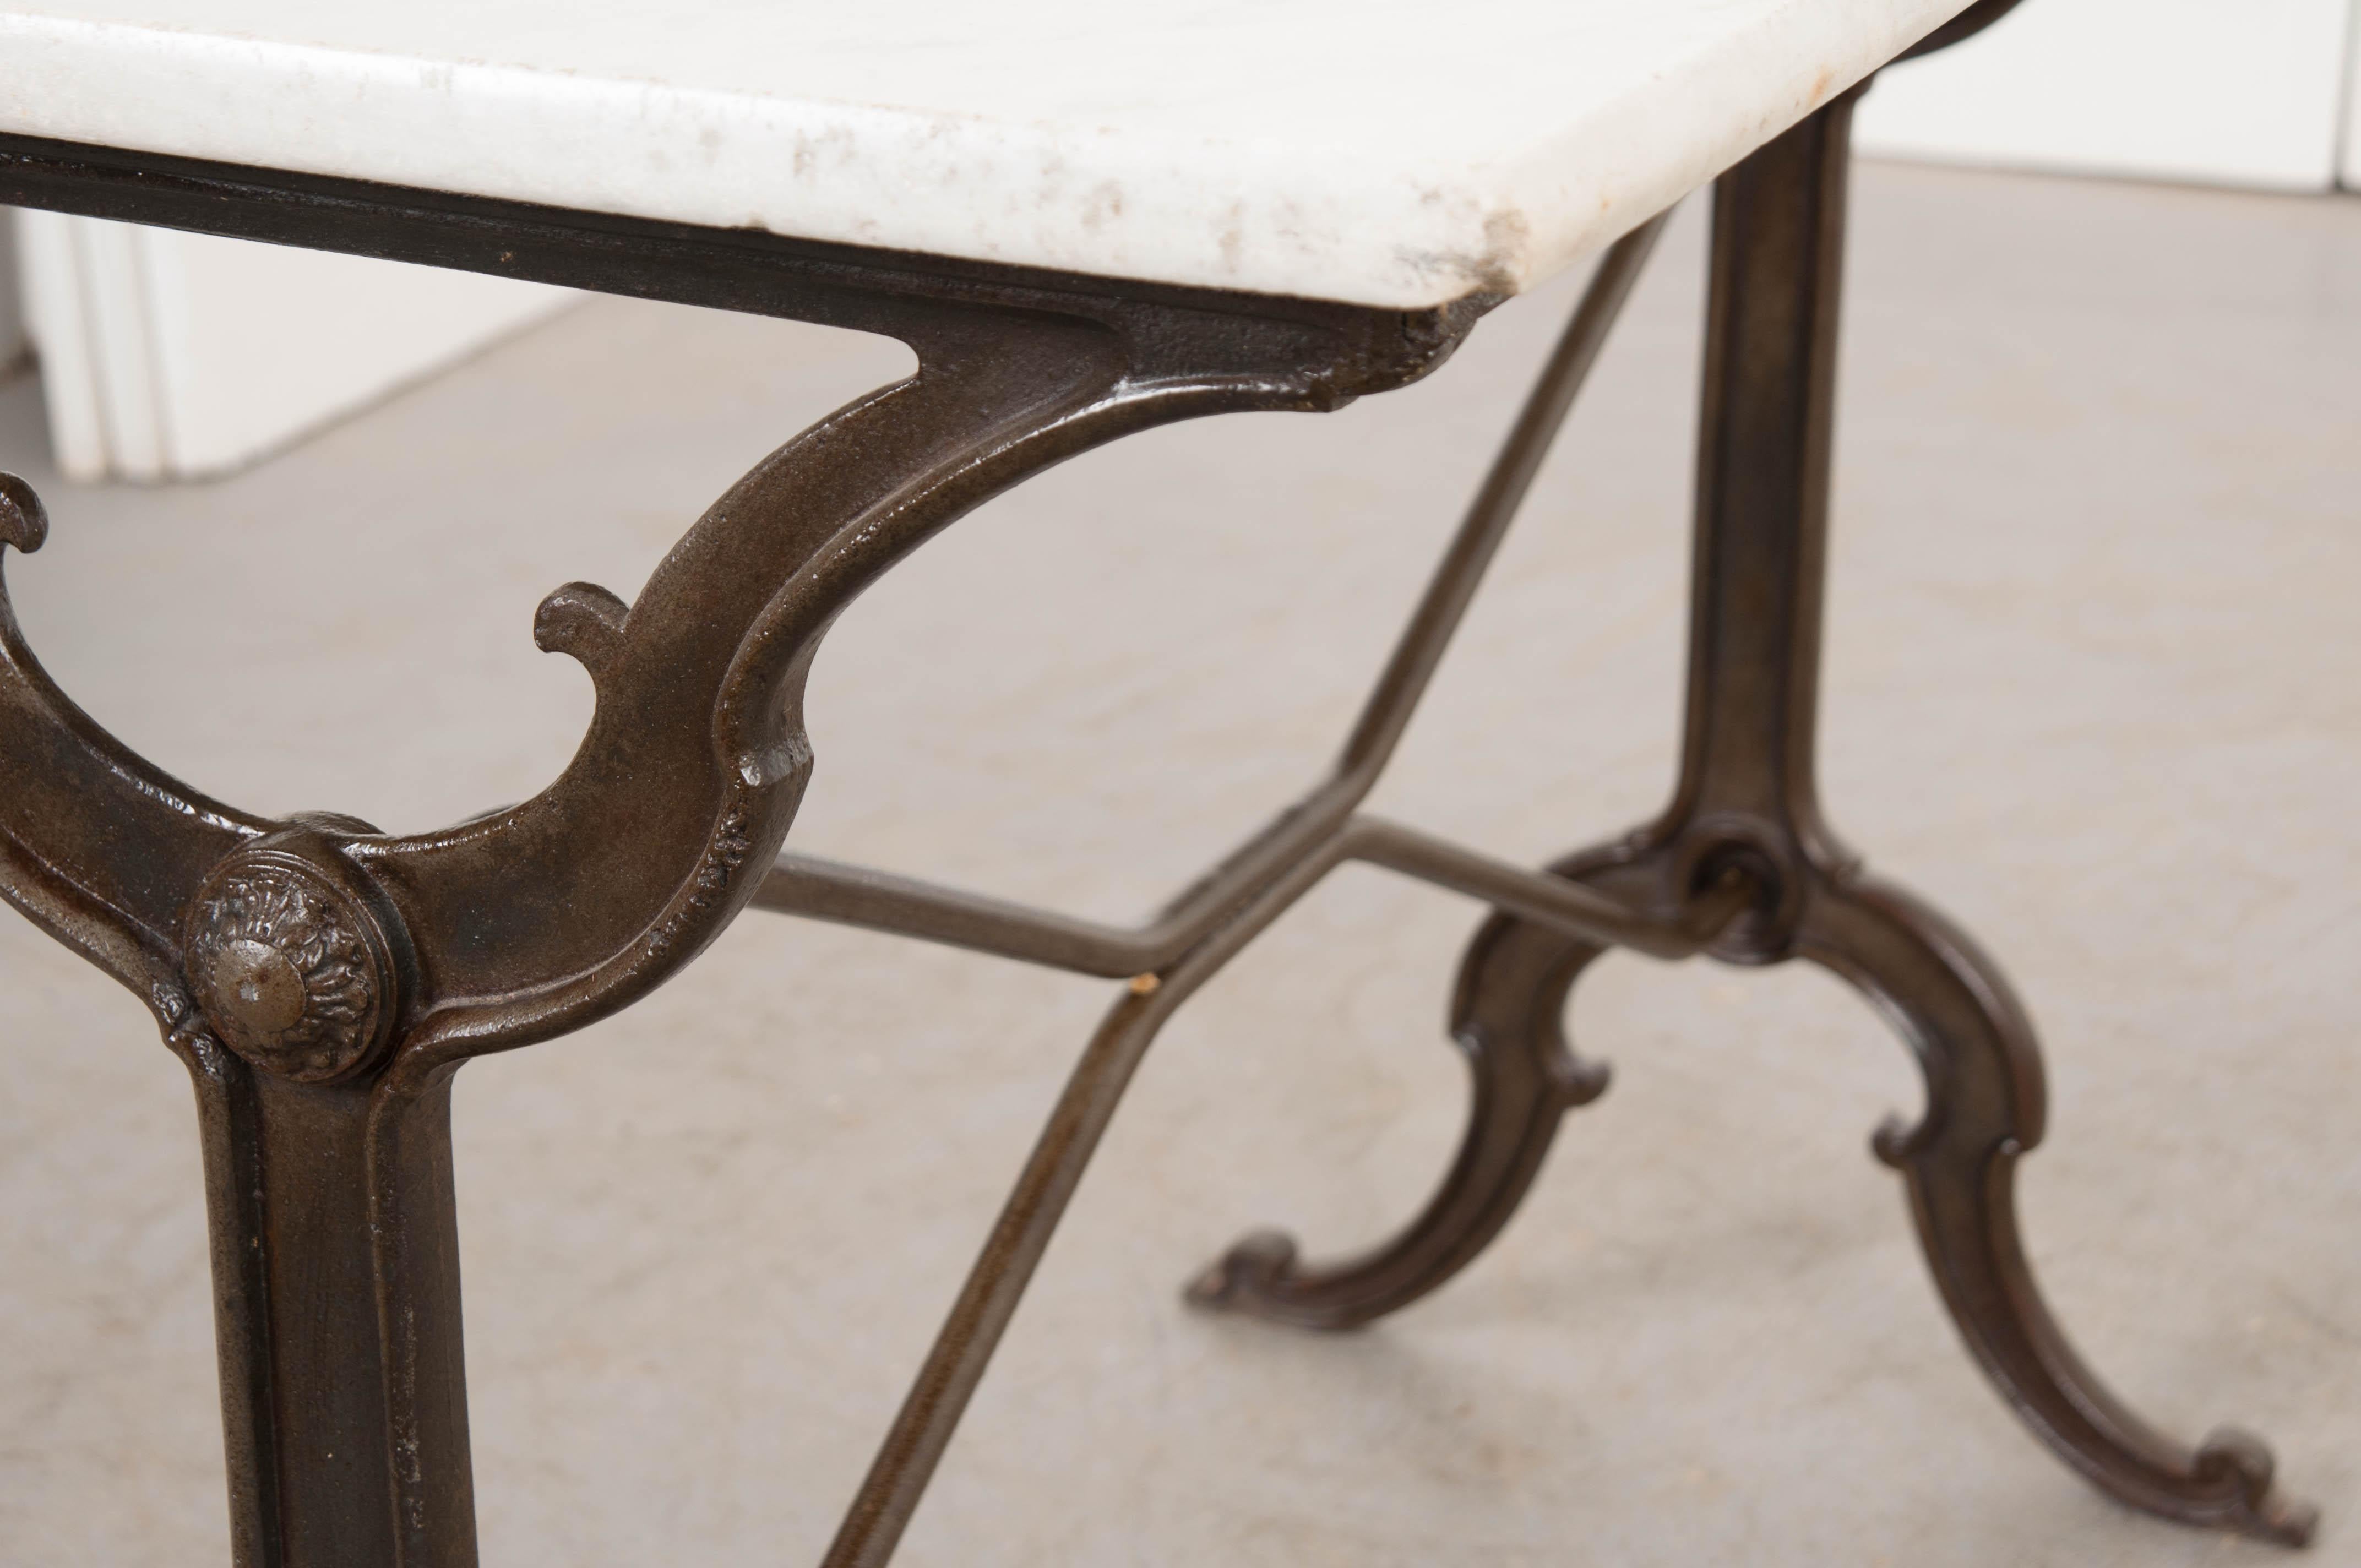 A charming French marble-top garden table, circa 1890s, with a classically styled iron base. The white marble top has beautiful inclusions throughout and the base has X-form supports and the scroll-form feet. This wonderful table is not confined to